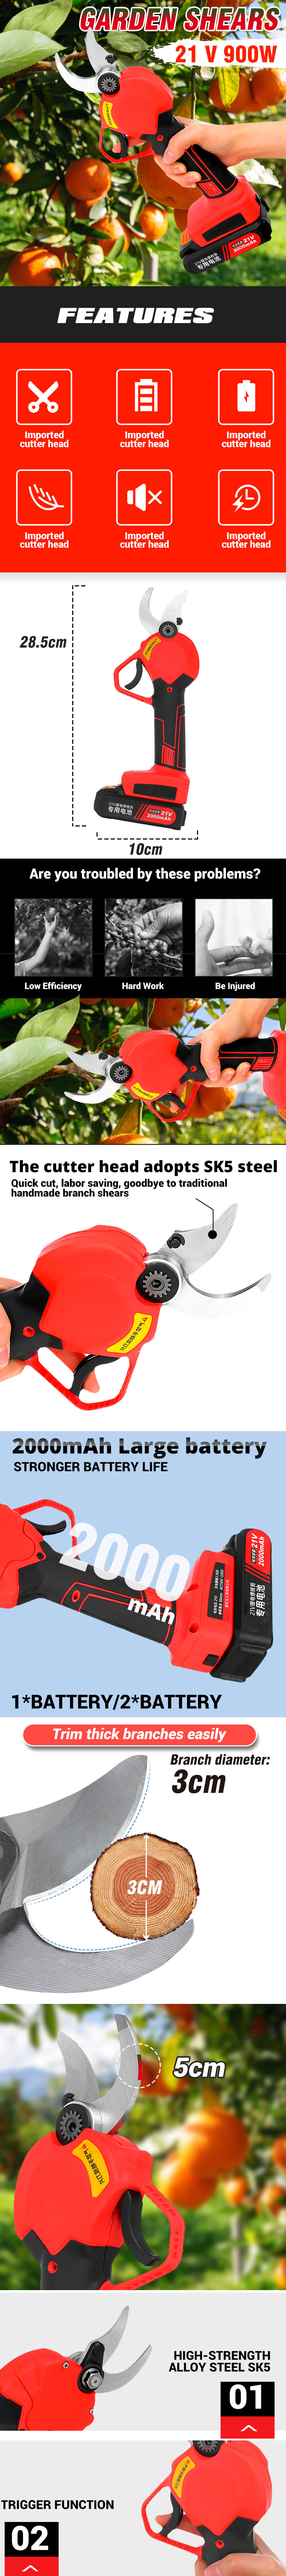 900W-21V-Electric-Pruning-Shears-Gardening-Scissors-Branches-Cutter-W-12pcs-Battery-1783171-1